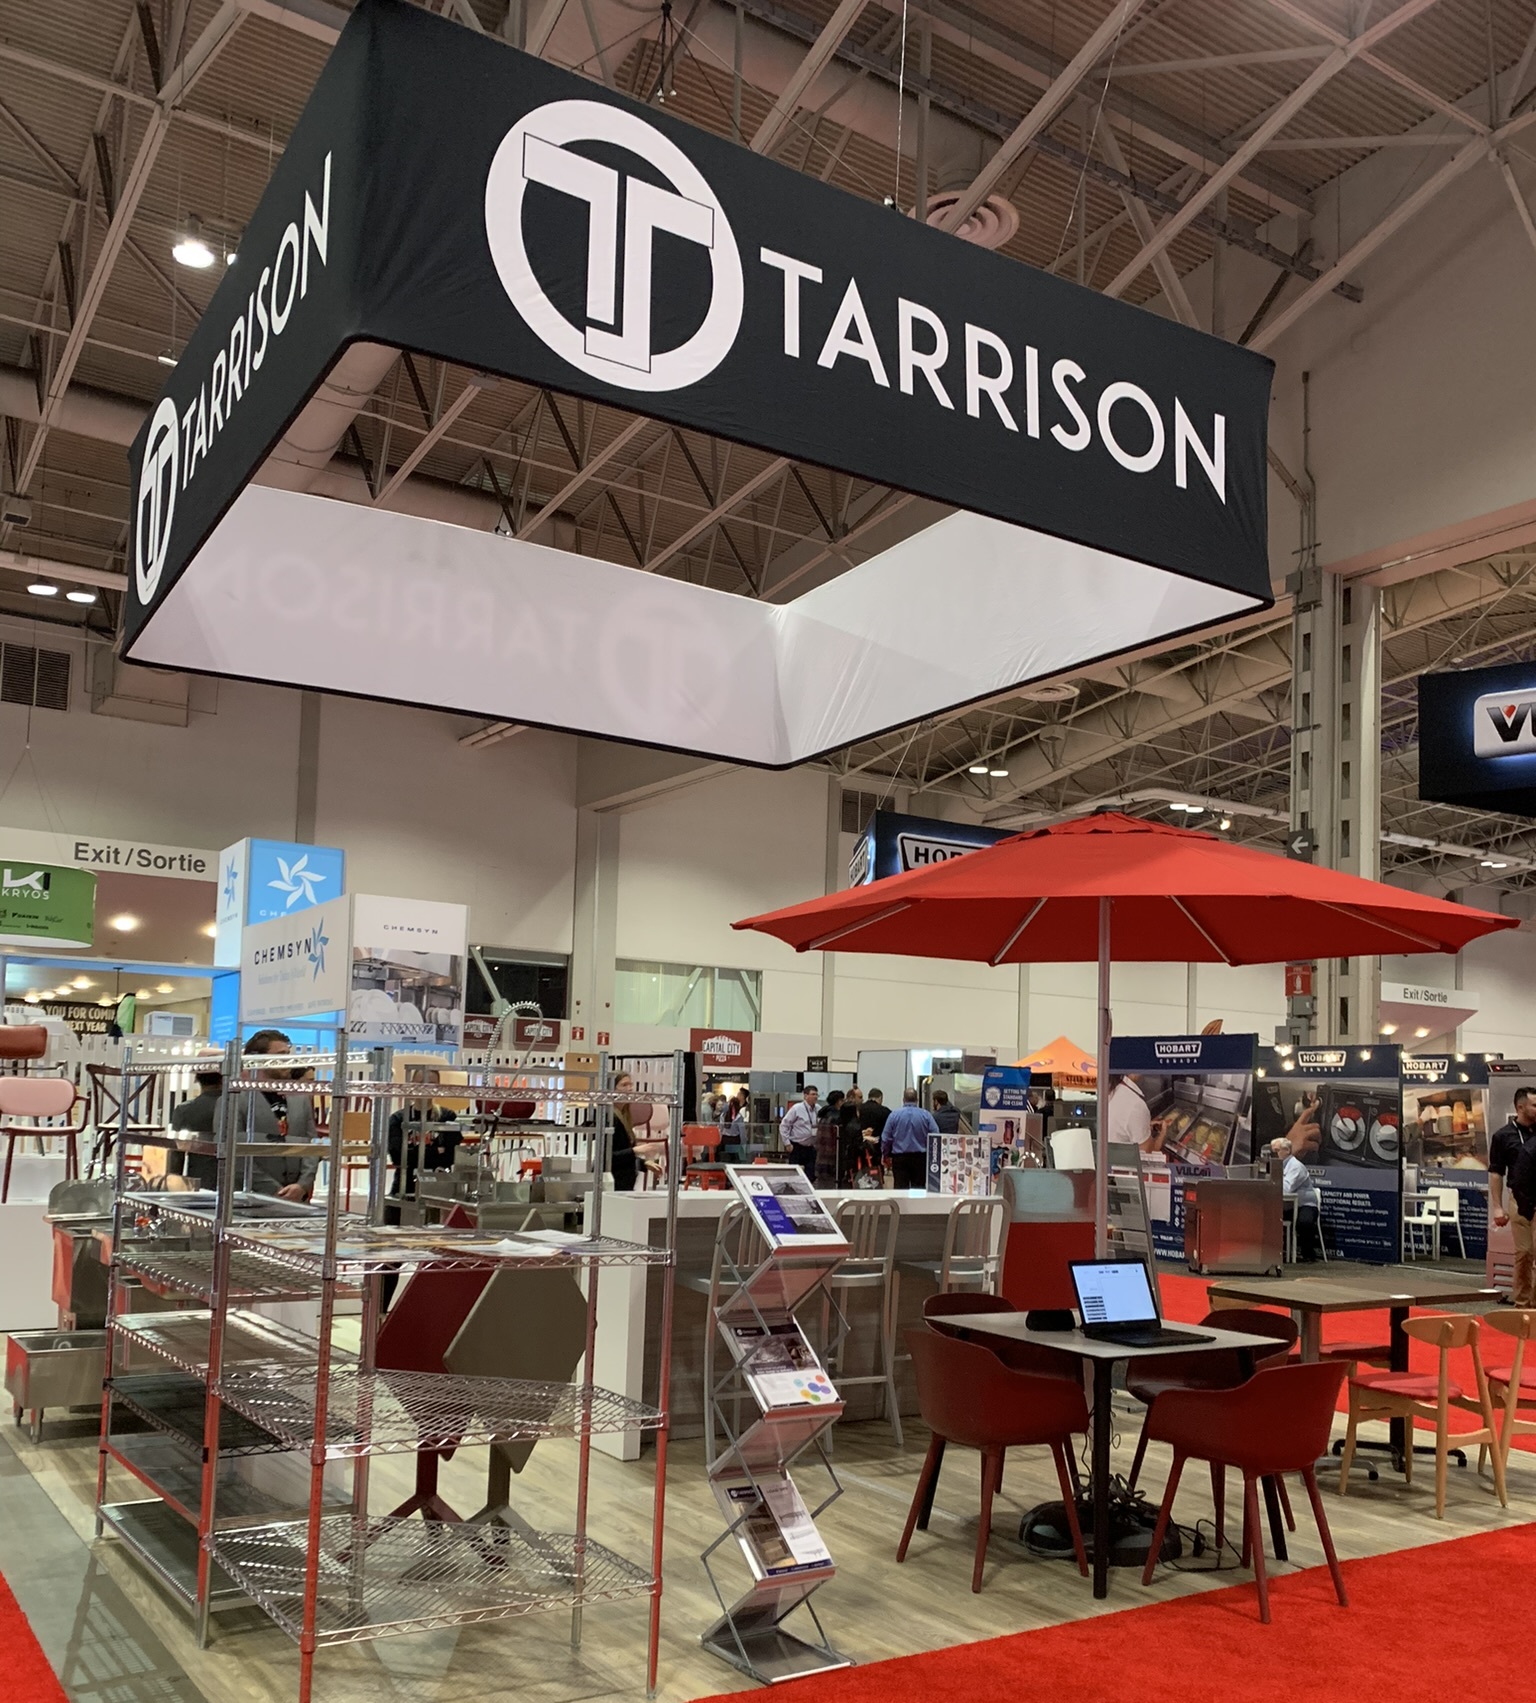 Tarrison's booth at the Restaurants Canada Show. Tarrison's hanging banner features prominently at the top of the image, while the stainless steel and furniture in the booth can be seen at the bottom of the photo